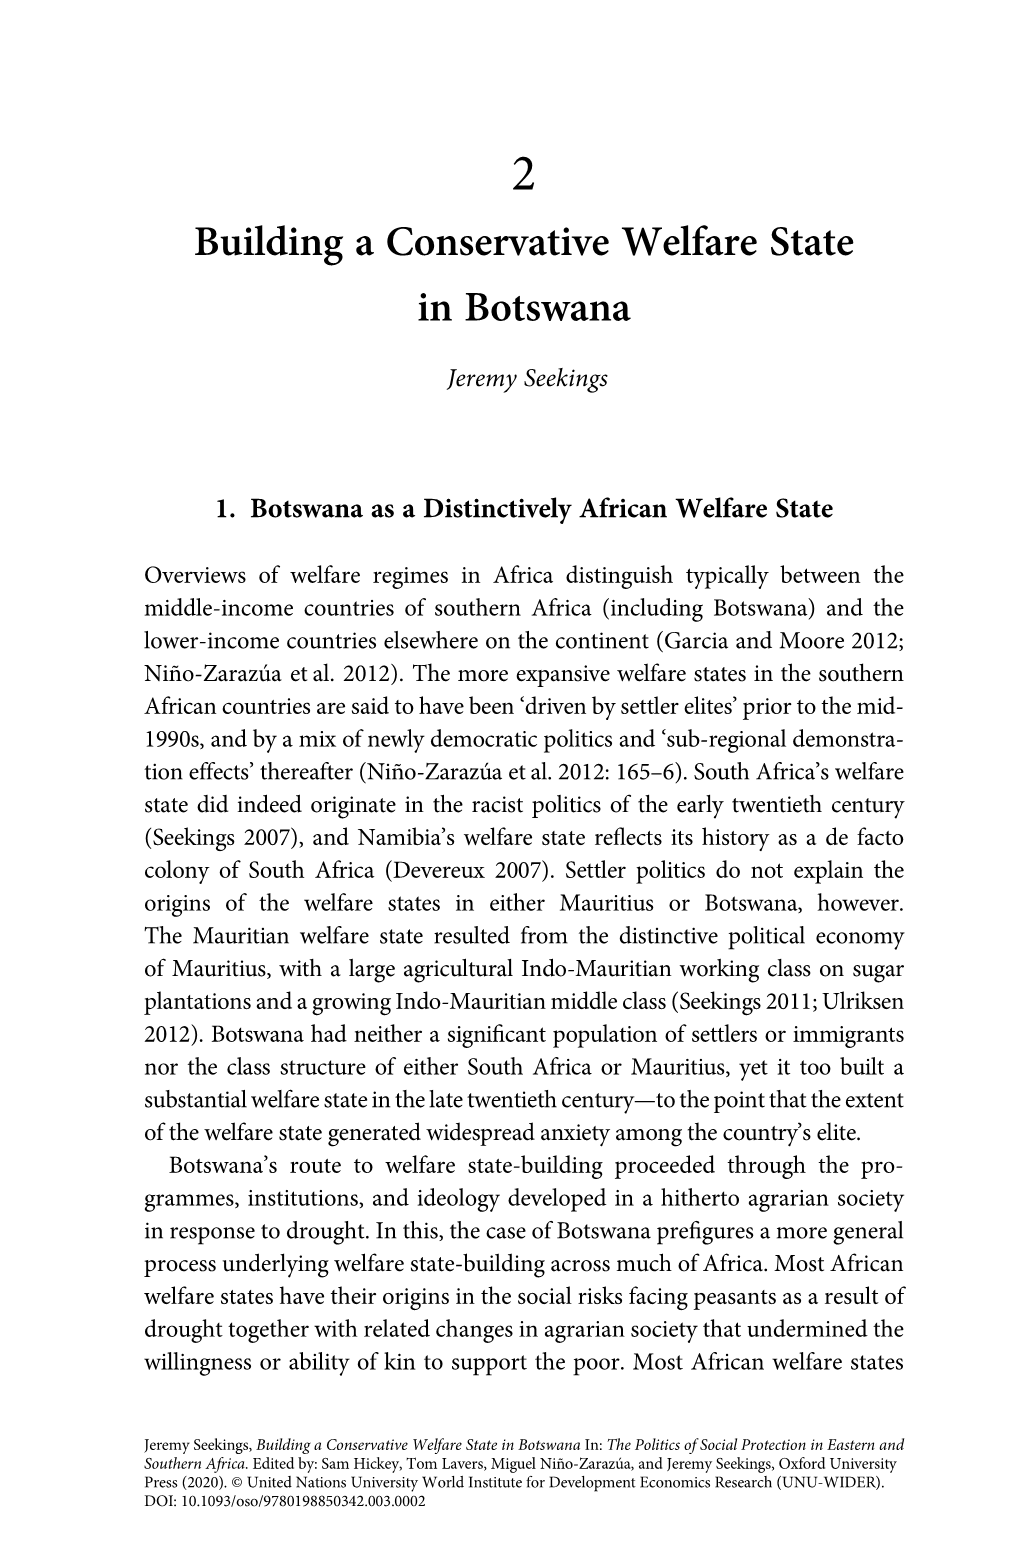 Building a Conservative Welfare State in Botswana